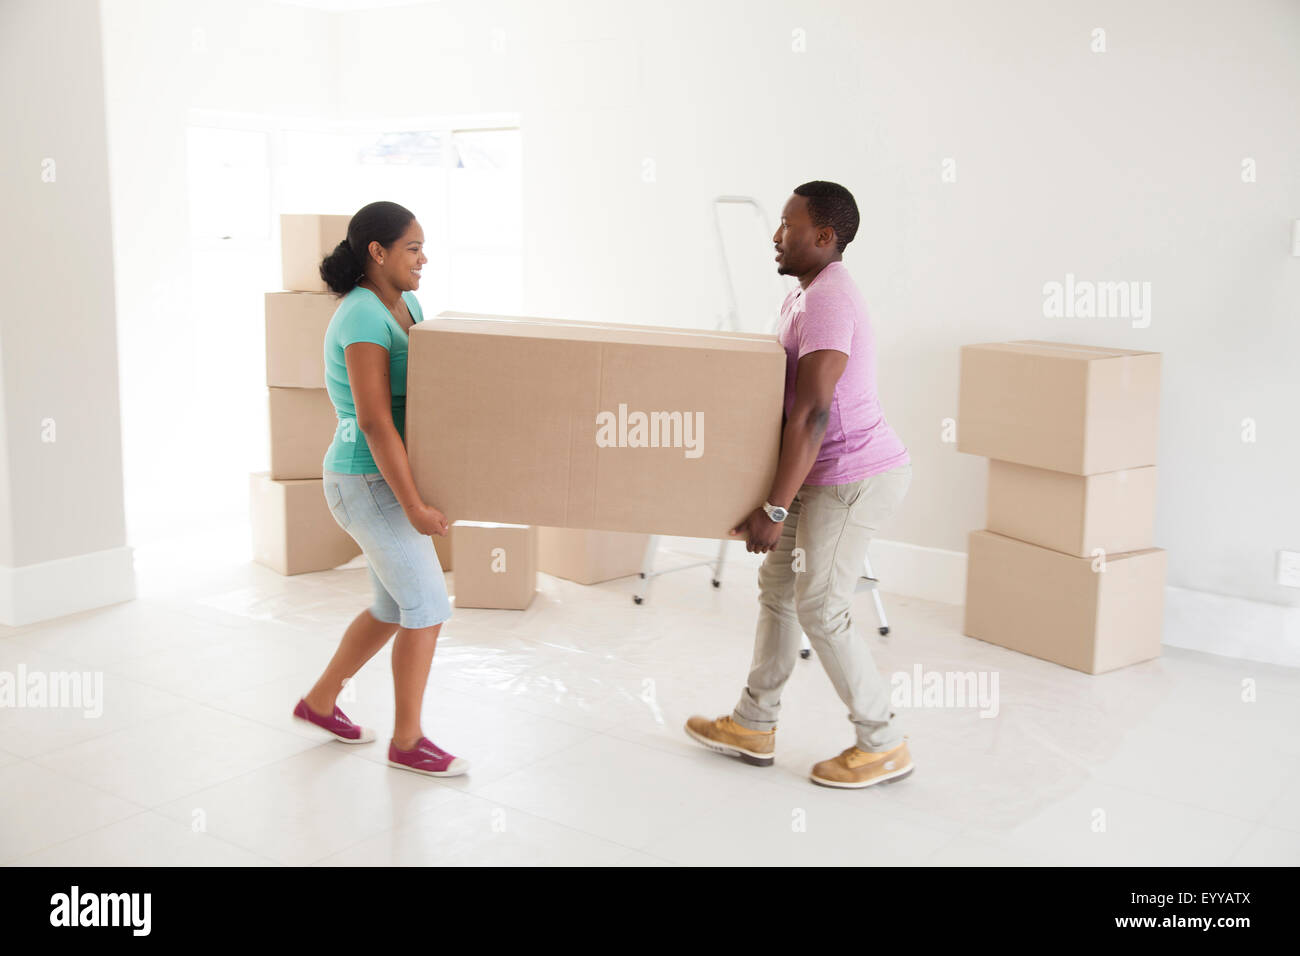 Couple carrying cardboard box in new home Stock Photo